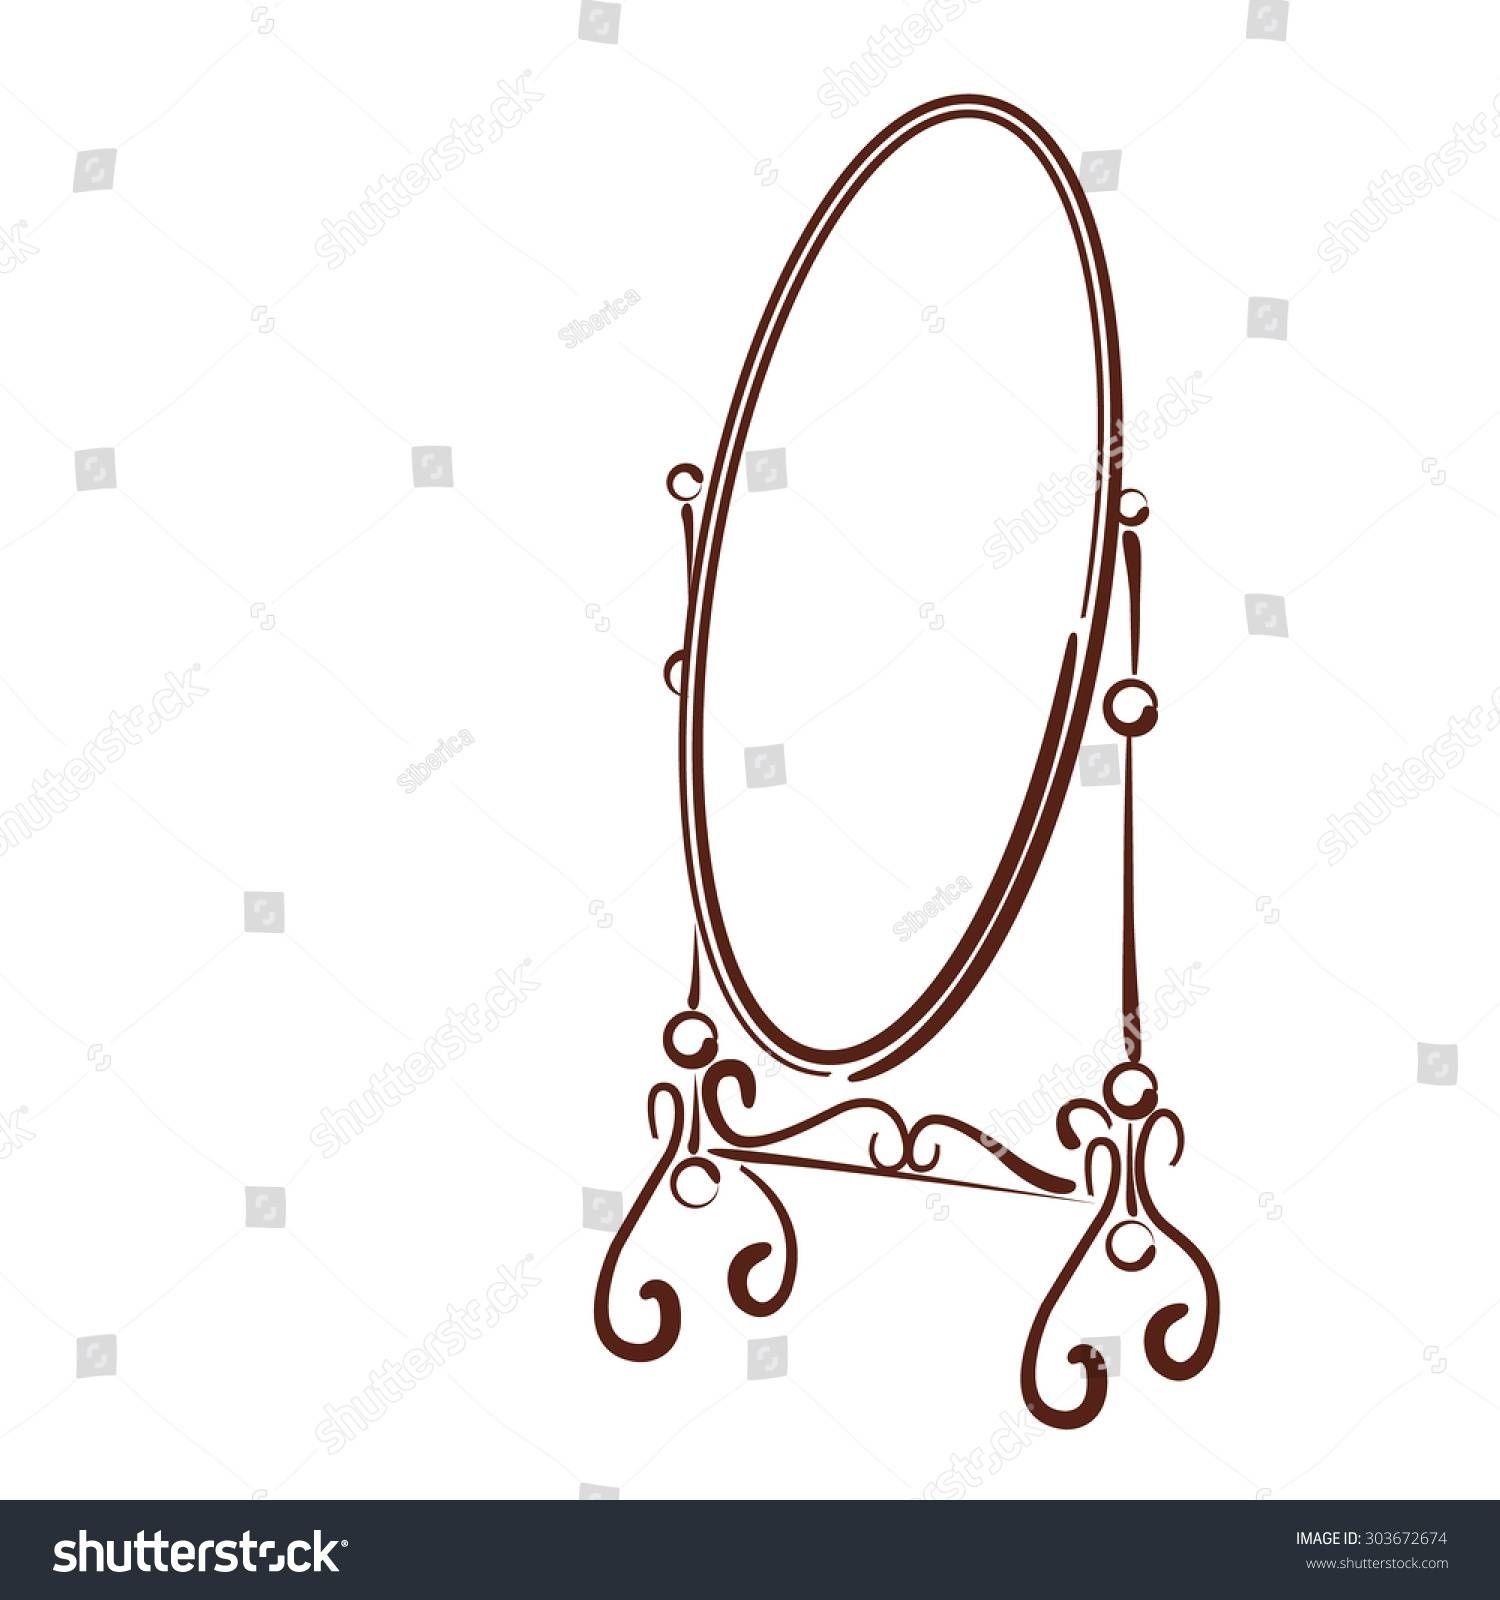 Big Standing Mirror Vintage Interior Sketch Stock Vector 303672674 Within Vintage Standing Mirrors (View 10 of 15)